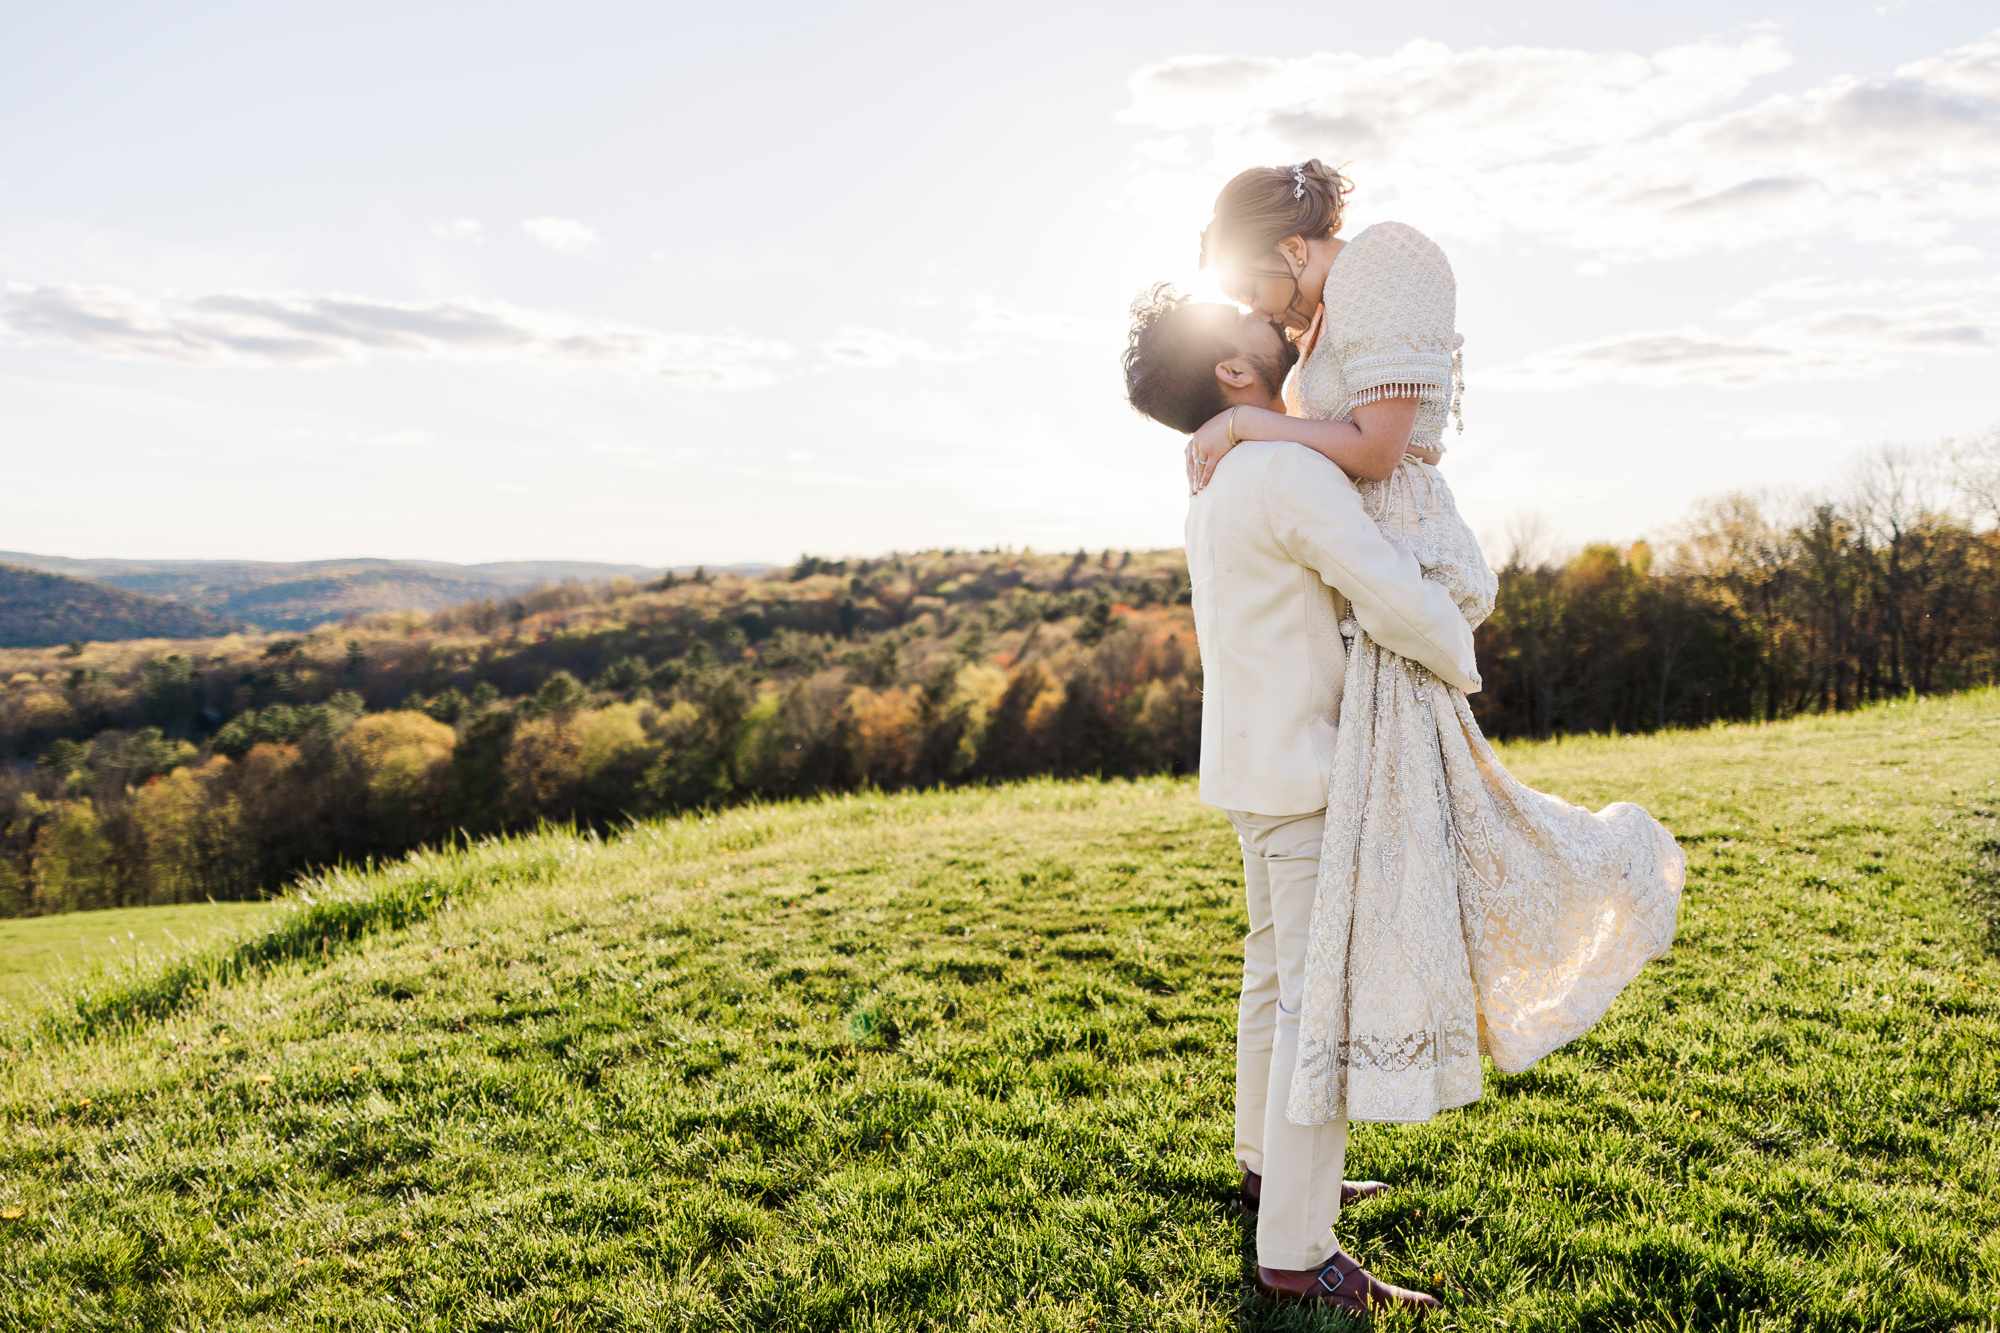 Wedding Photography Business with a Newborn